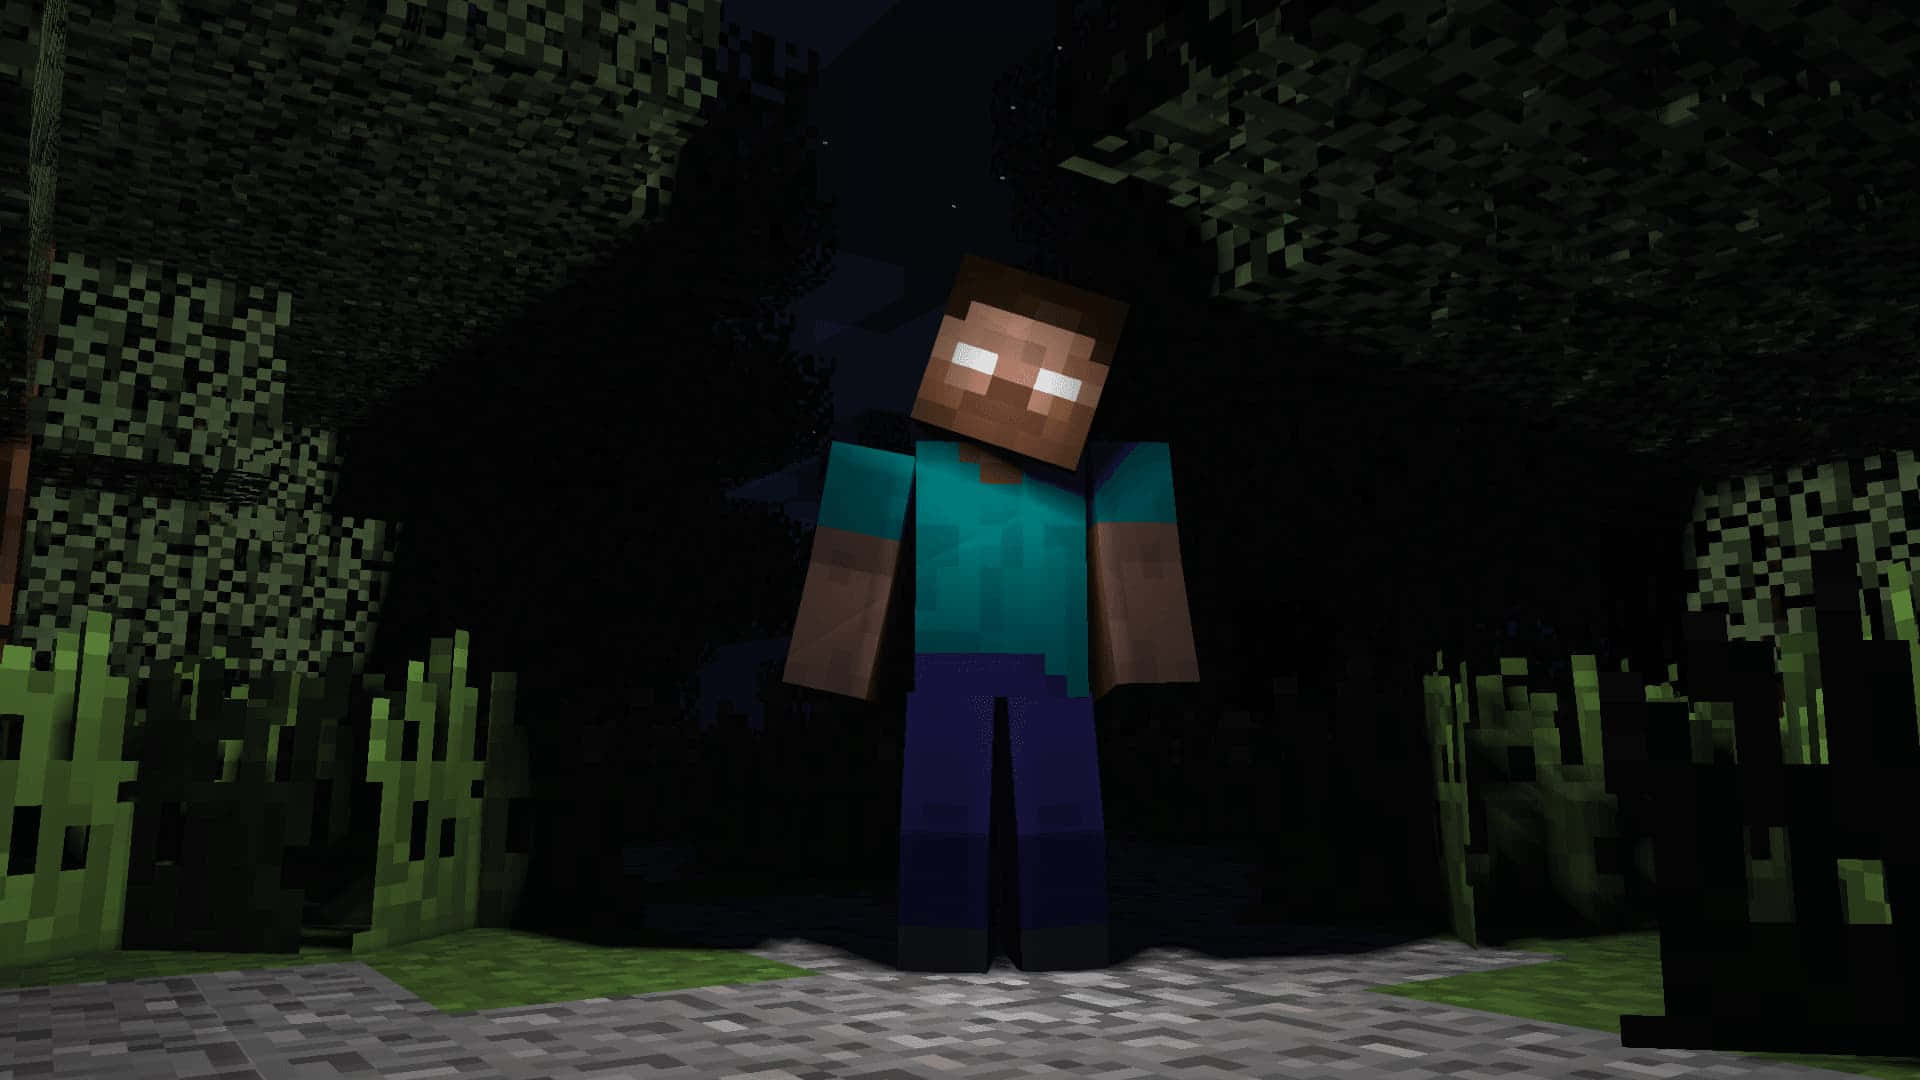 Herobrine stands alone against the darkness